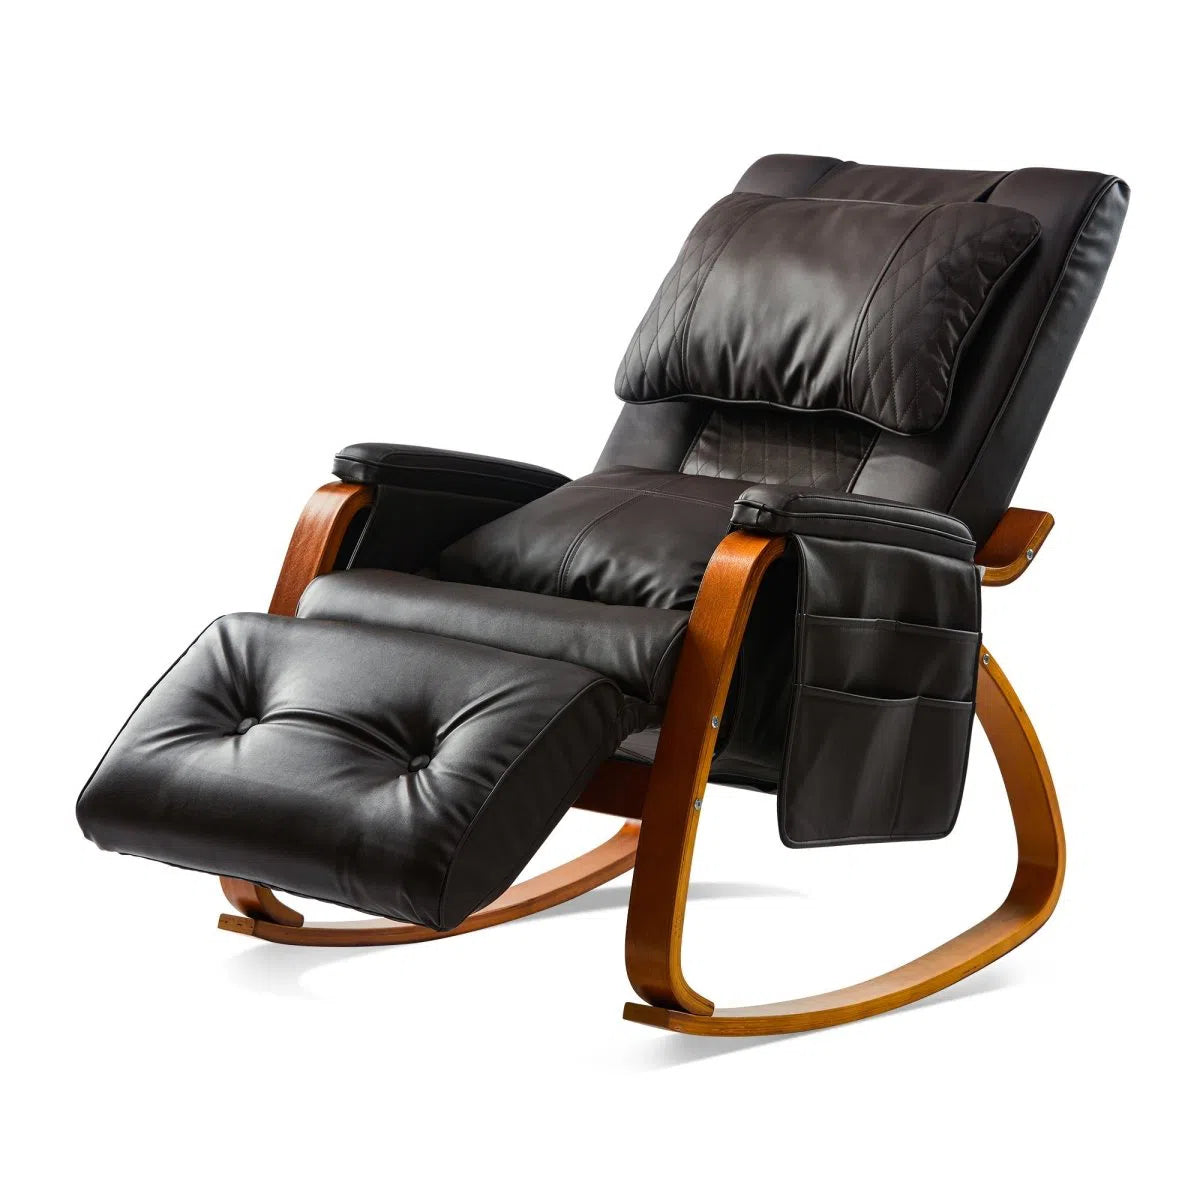 MASSAGE Comfortable Relax Rocking Chair Brown Home Decor by Design